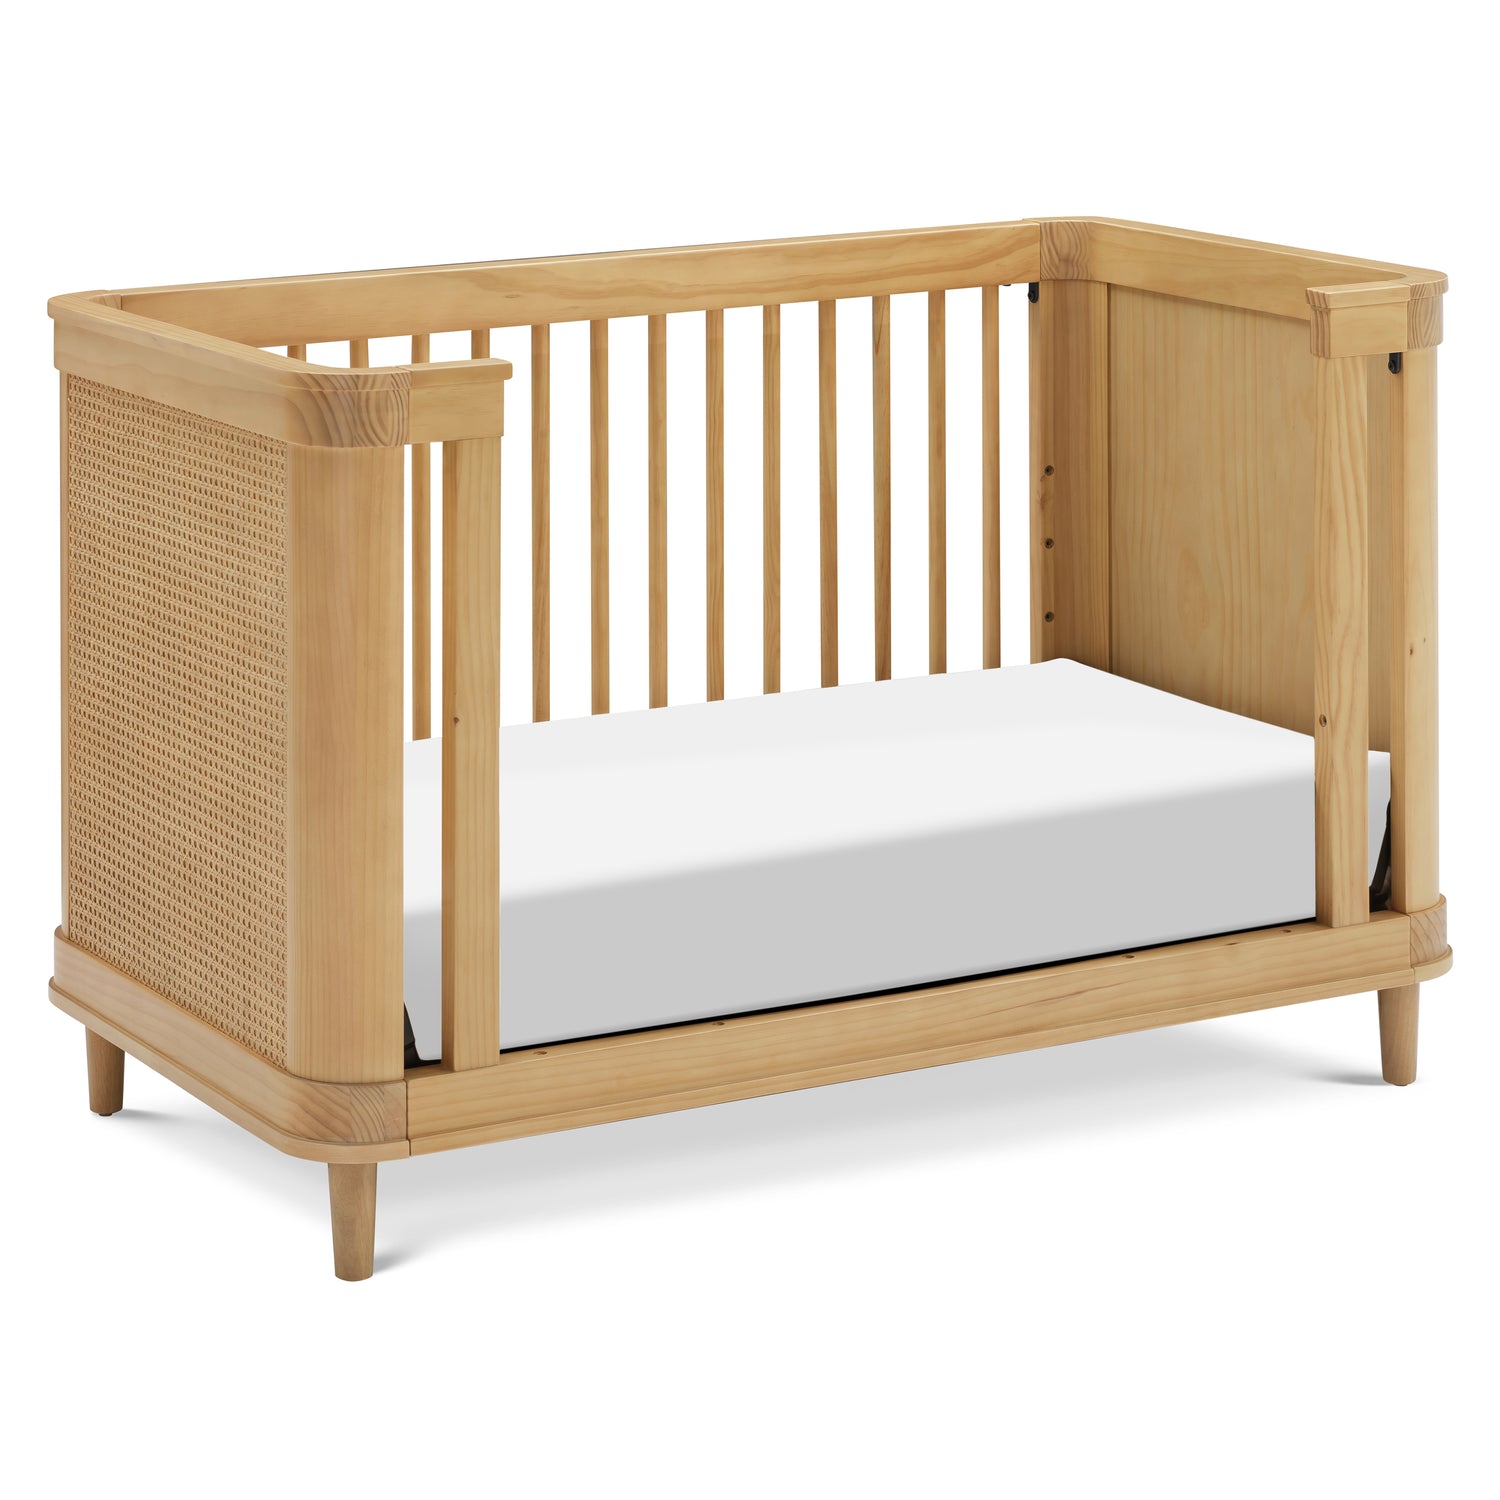 Daybed, M23701HYHC,Marin with Cane 3-in-1 Convertible Crib in Honey and Honey Cane